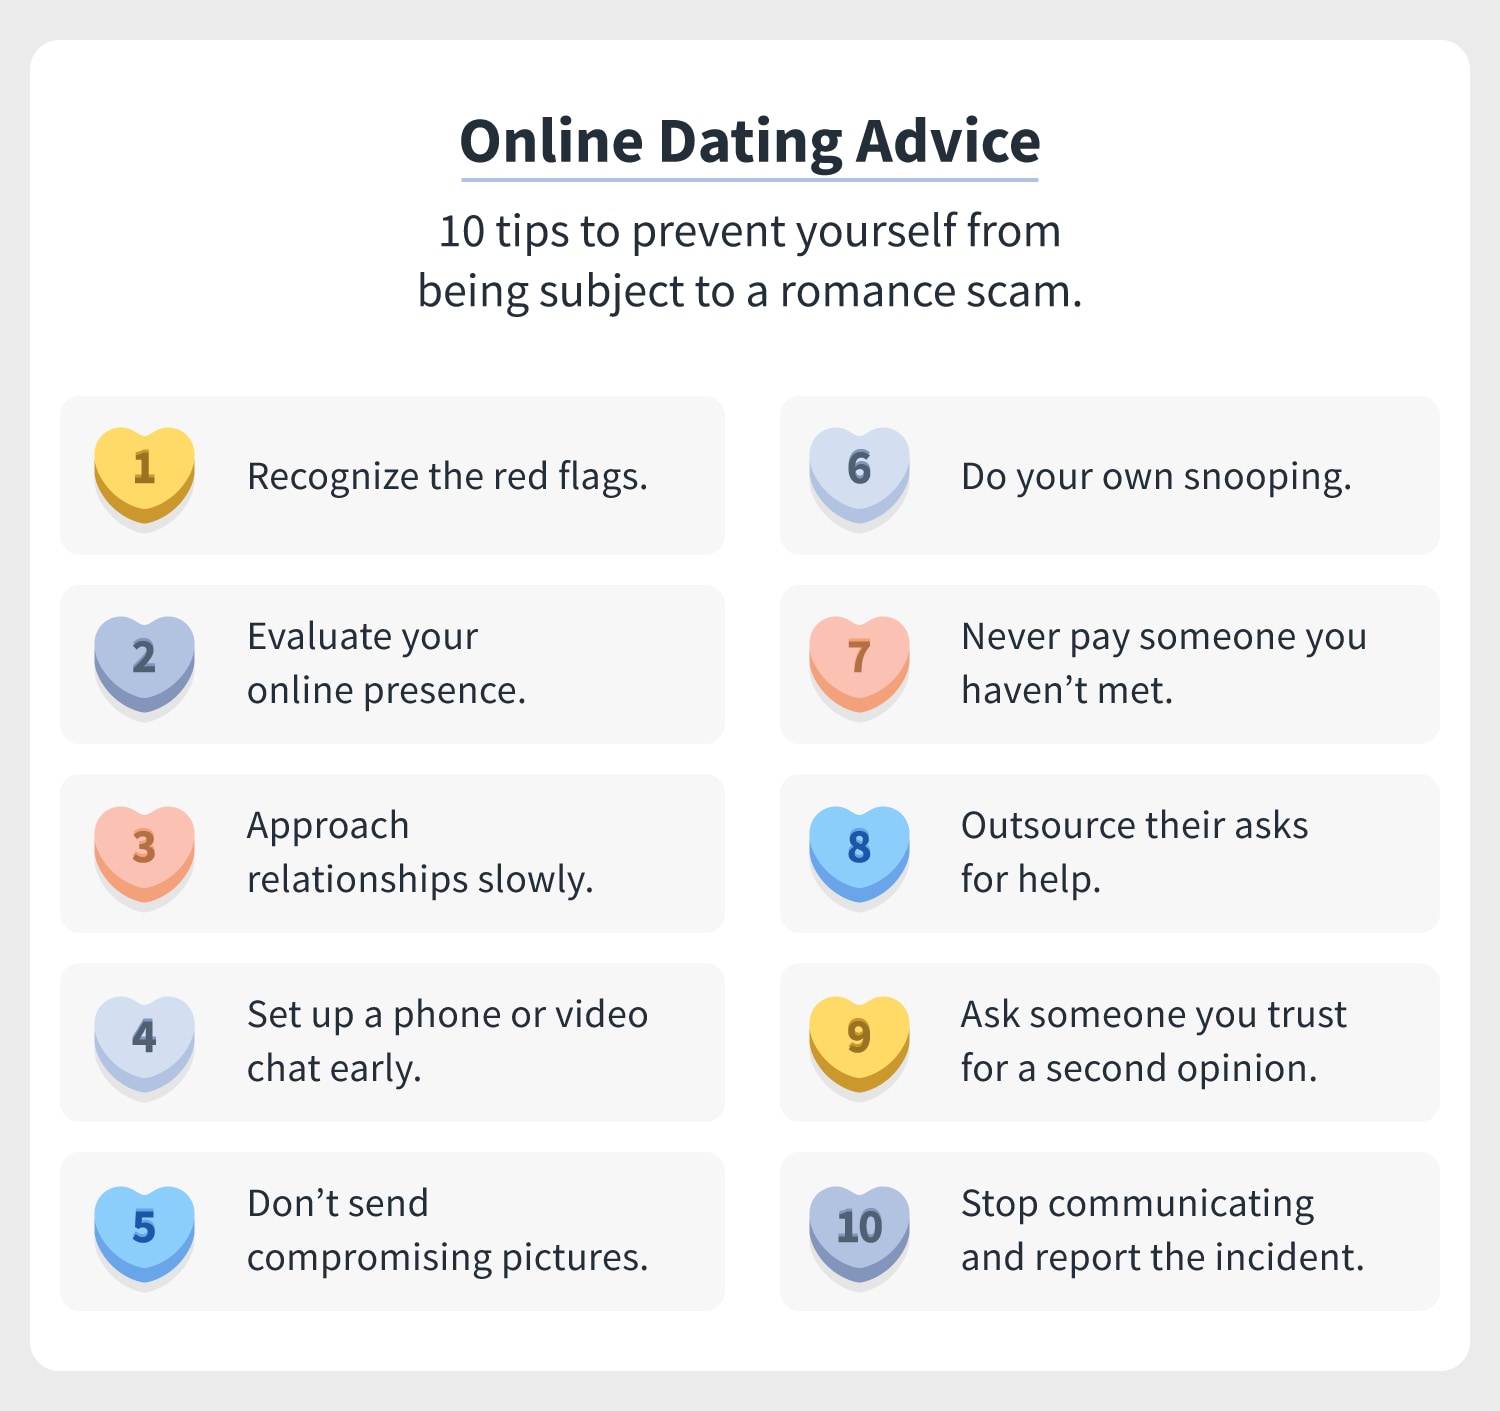 12 Online Dating Tips from Real Women Who Met Their Spouses on ‘The Apps’